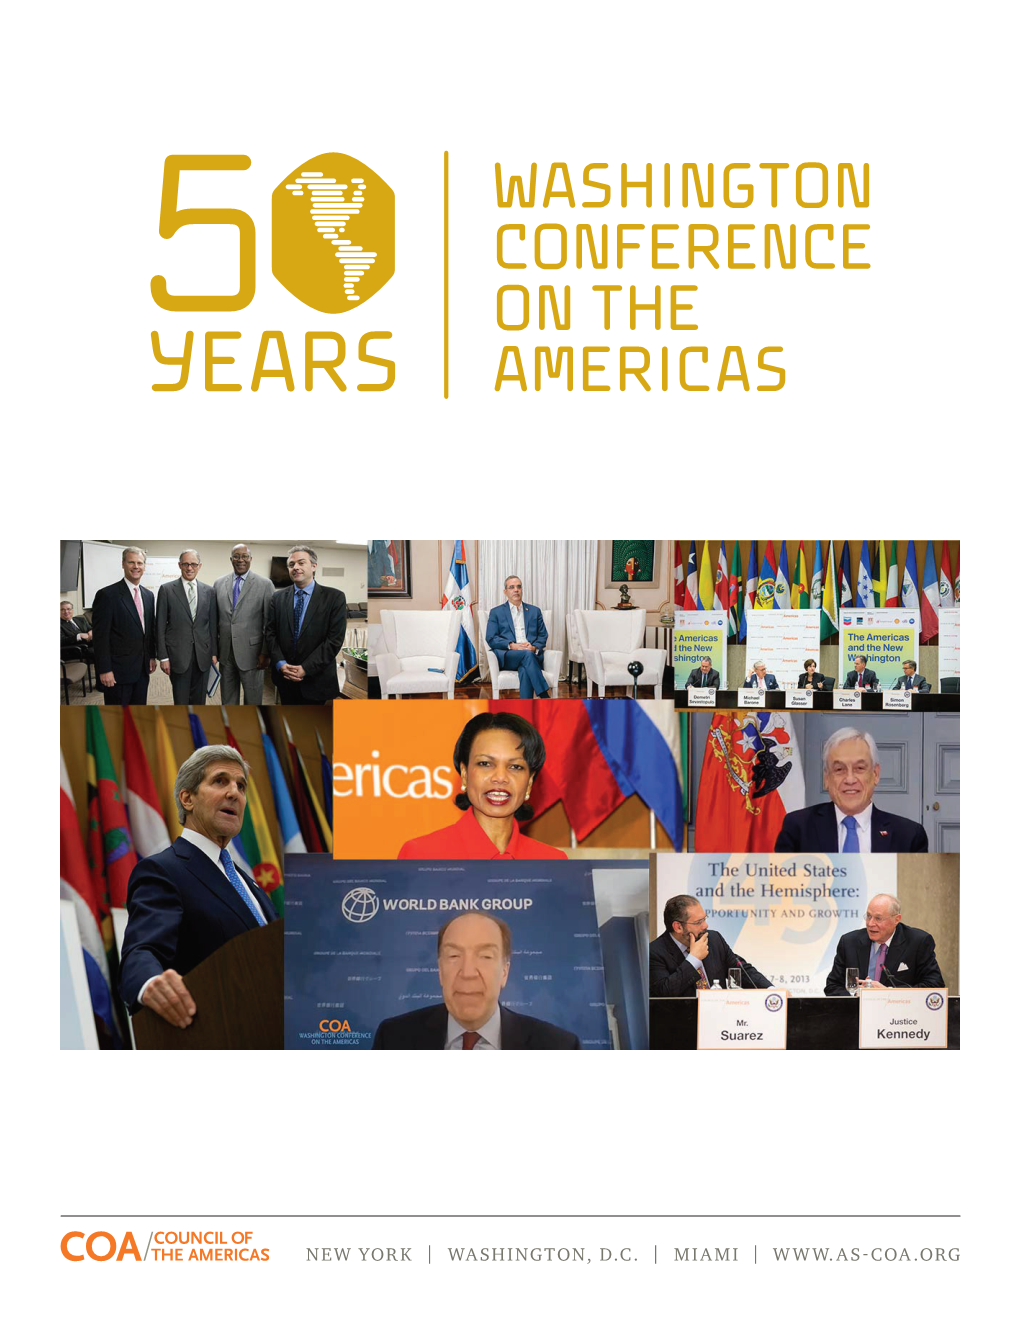 Report: 2020 Washington Conference on the Americas Virtual